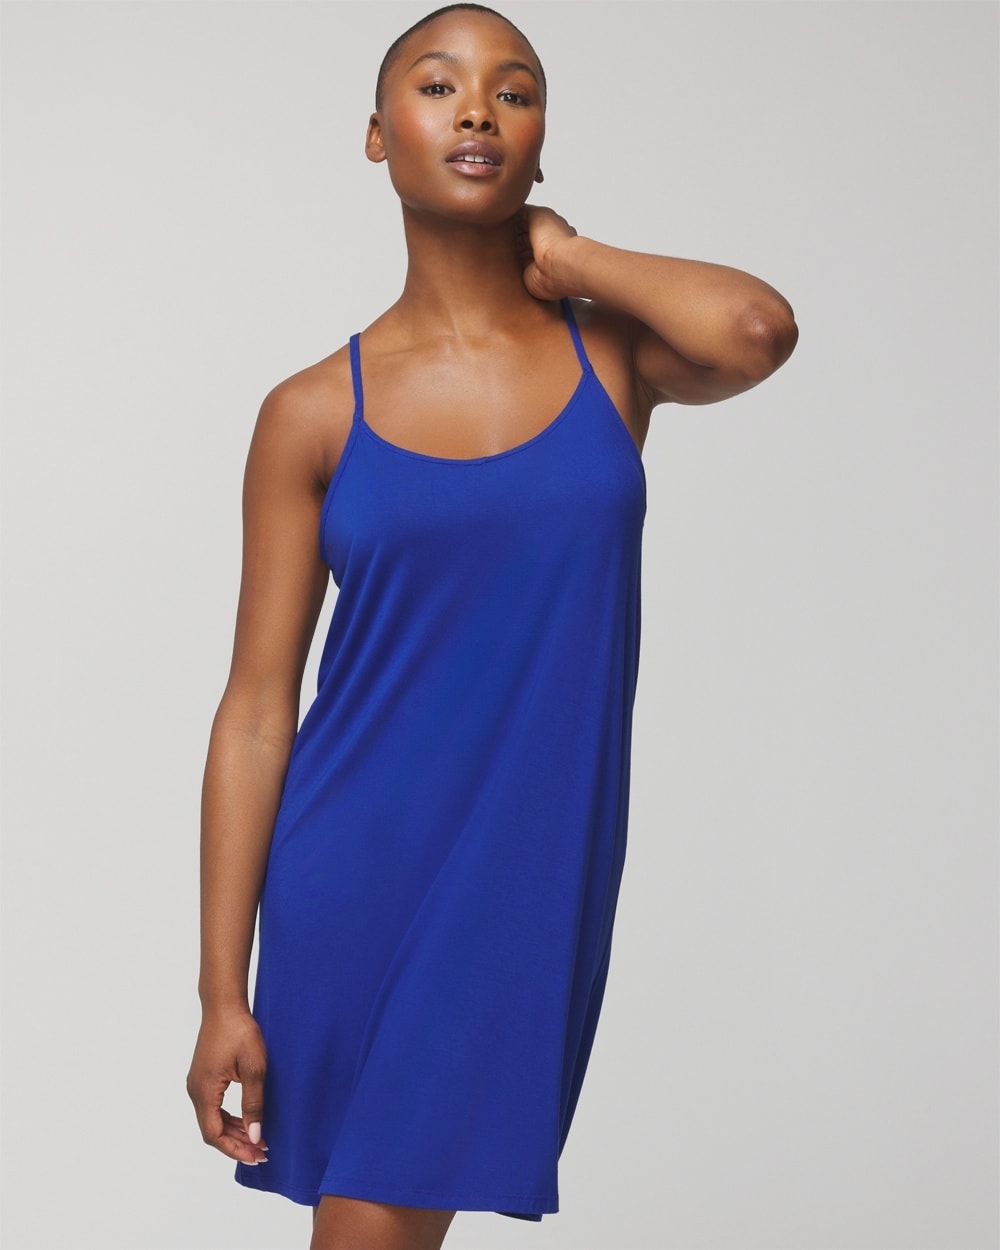 SOMA WOMEN'S COOL NIGHTS STRAPPY NIGHT GOWN IN ROYAL BLUE SIZE MEDIUM | SOMA